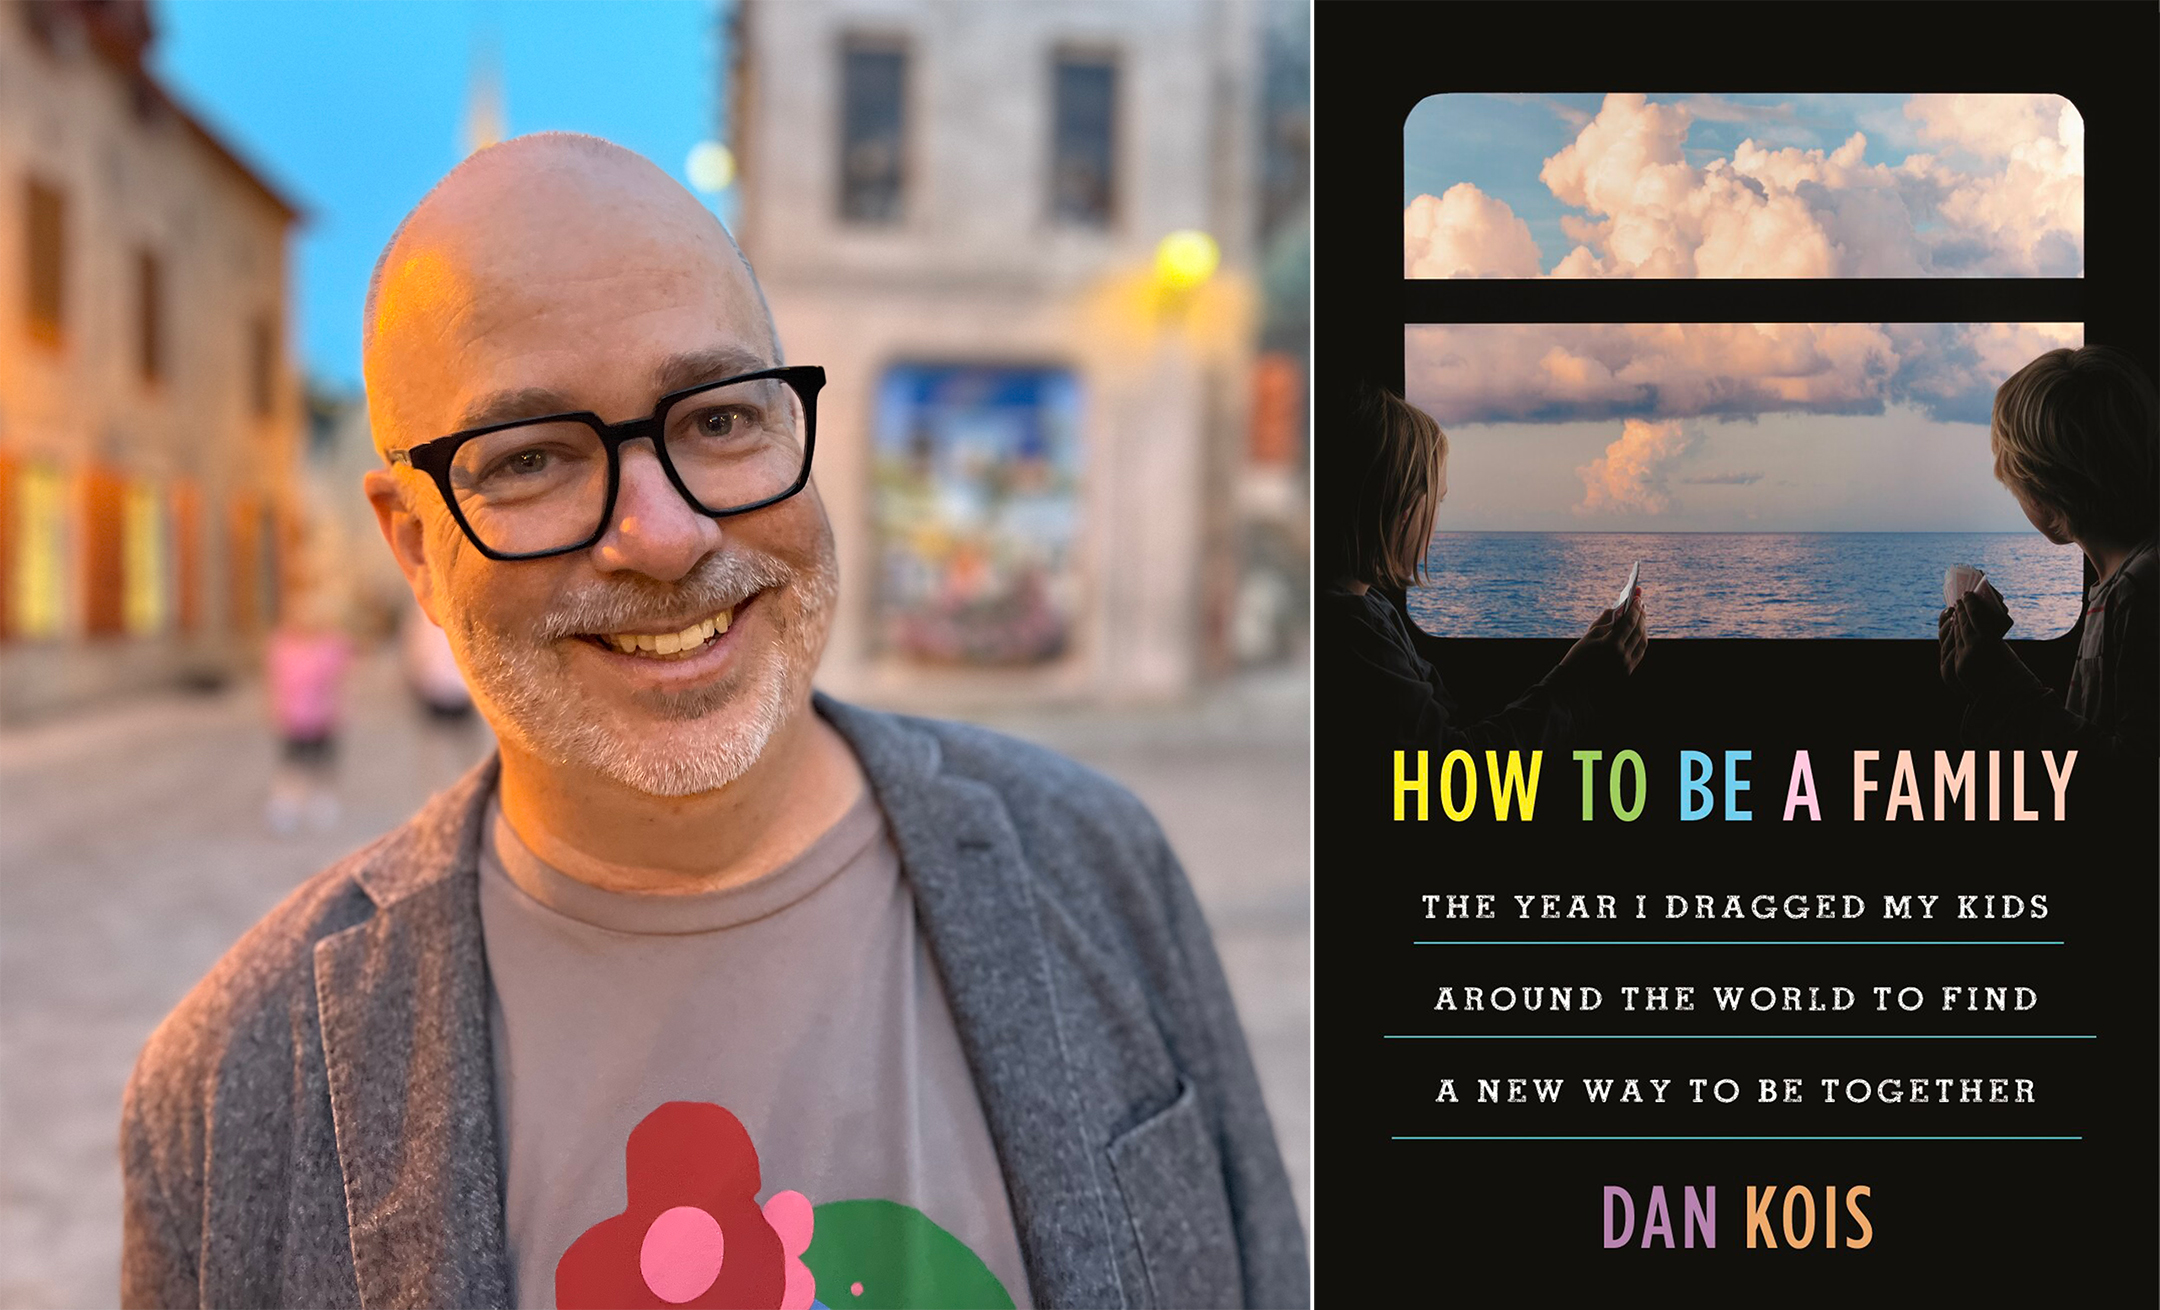 Headshot phot of Dan Kois on the left, cover of his book How to Be a Family on the right